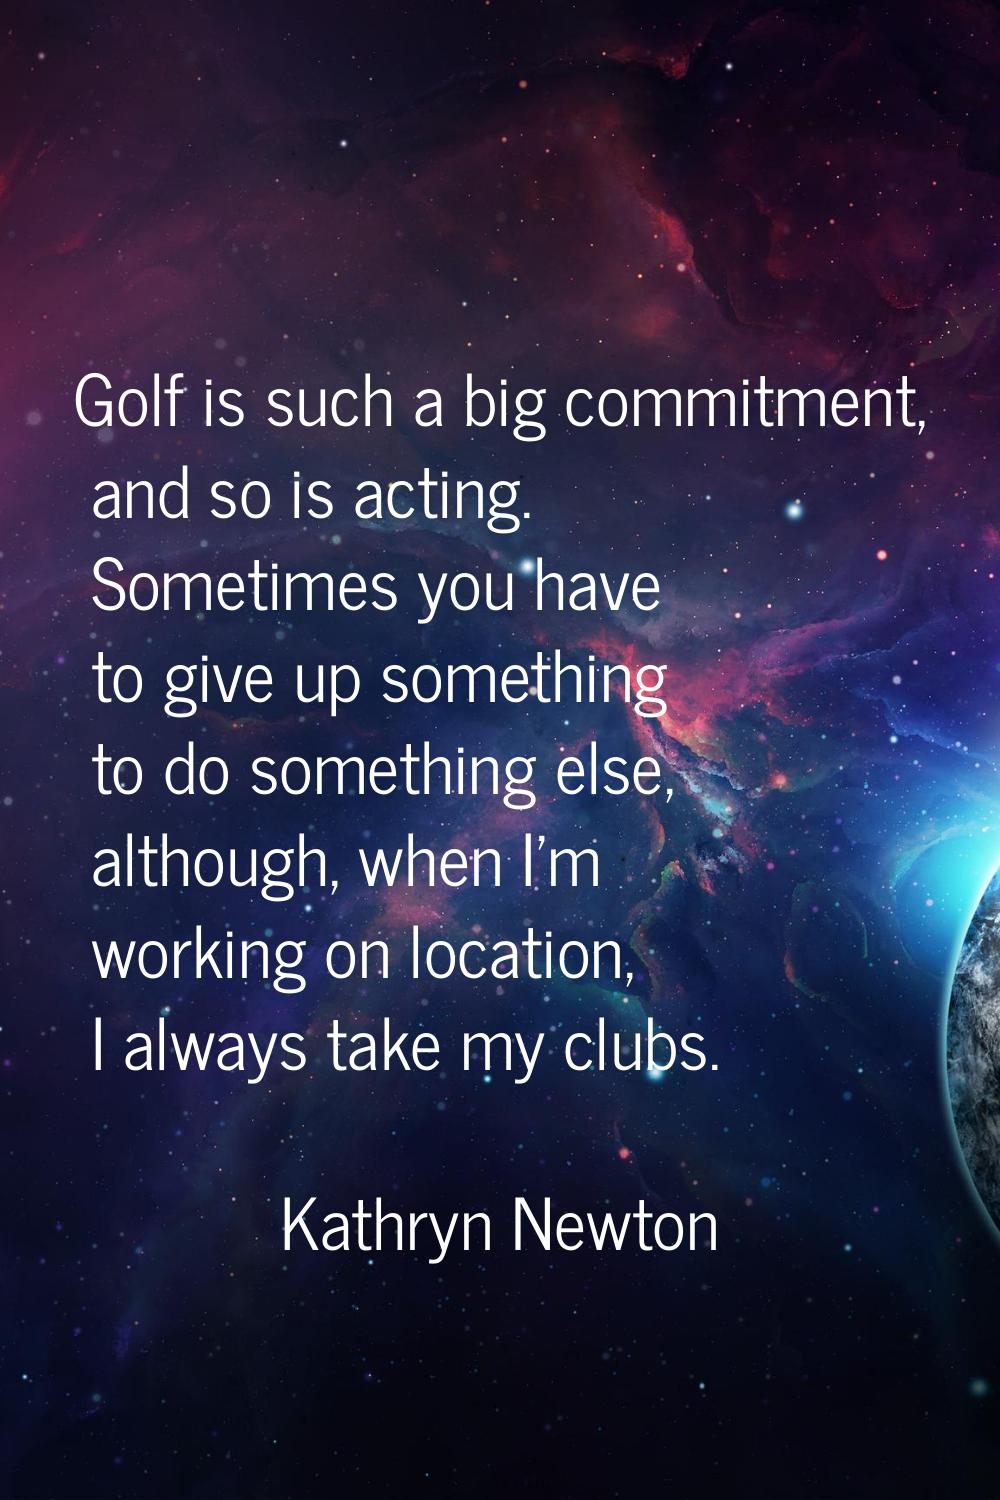 Golf is such a big commitment, and so is acting. Sometimes you have to give up something to do some